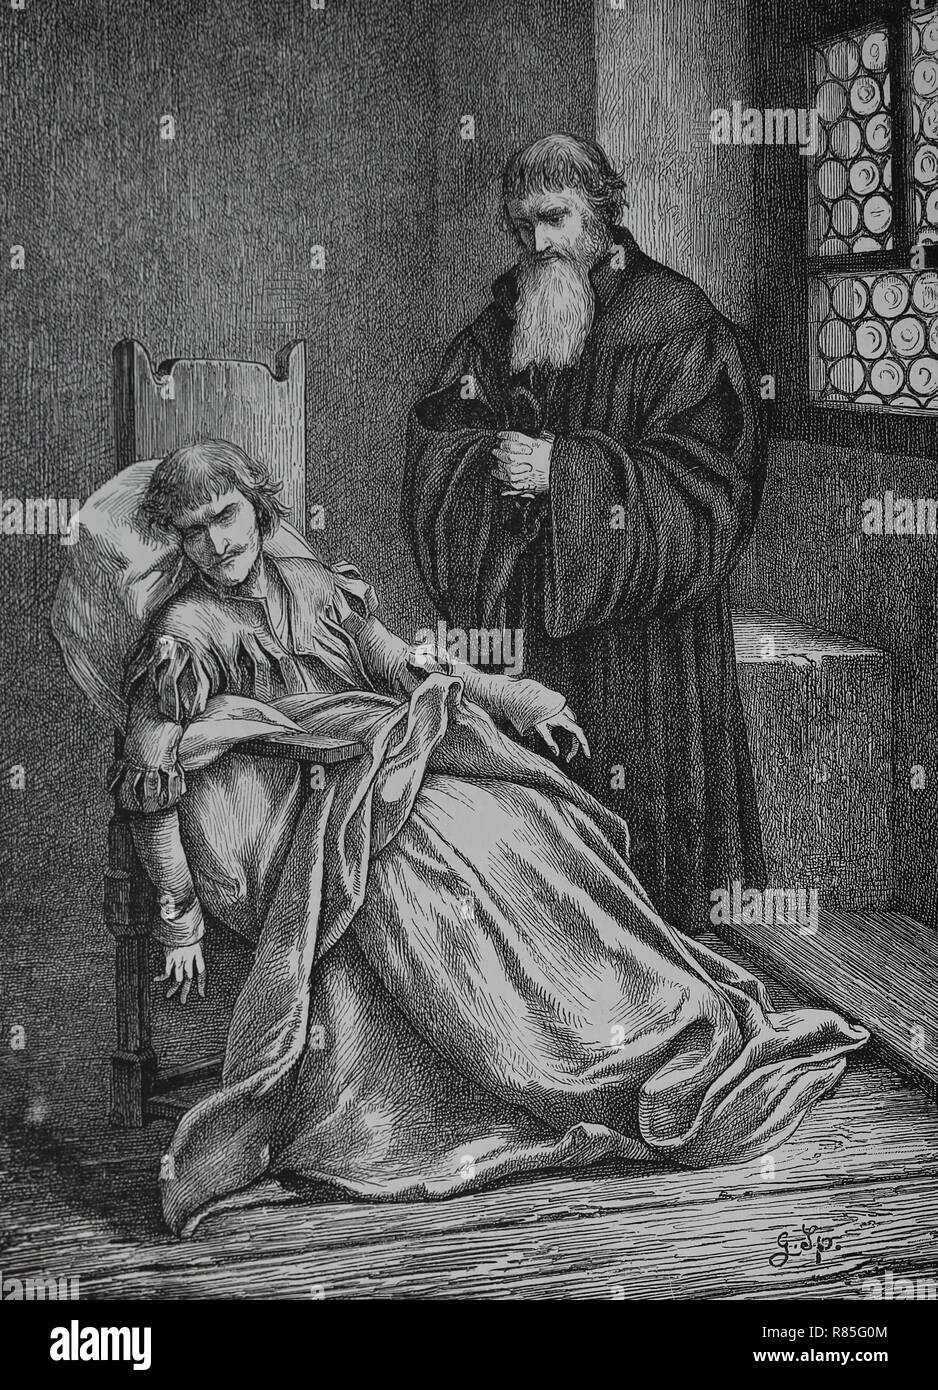 Ulrich von Hutten (1488-1523). German scholar, poet and critic of the Catholicism. Last moments. Engraving by Germania, 1882. Stock Photo